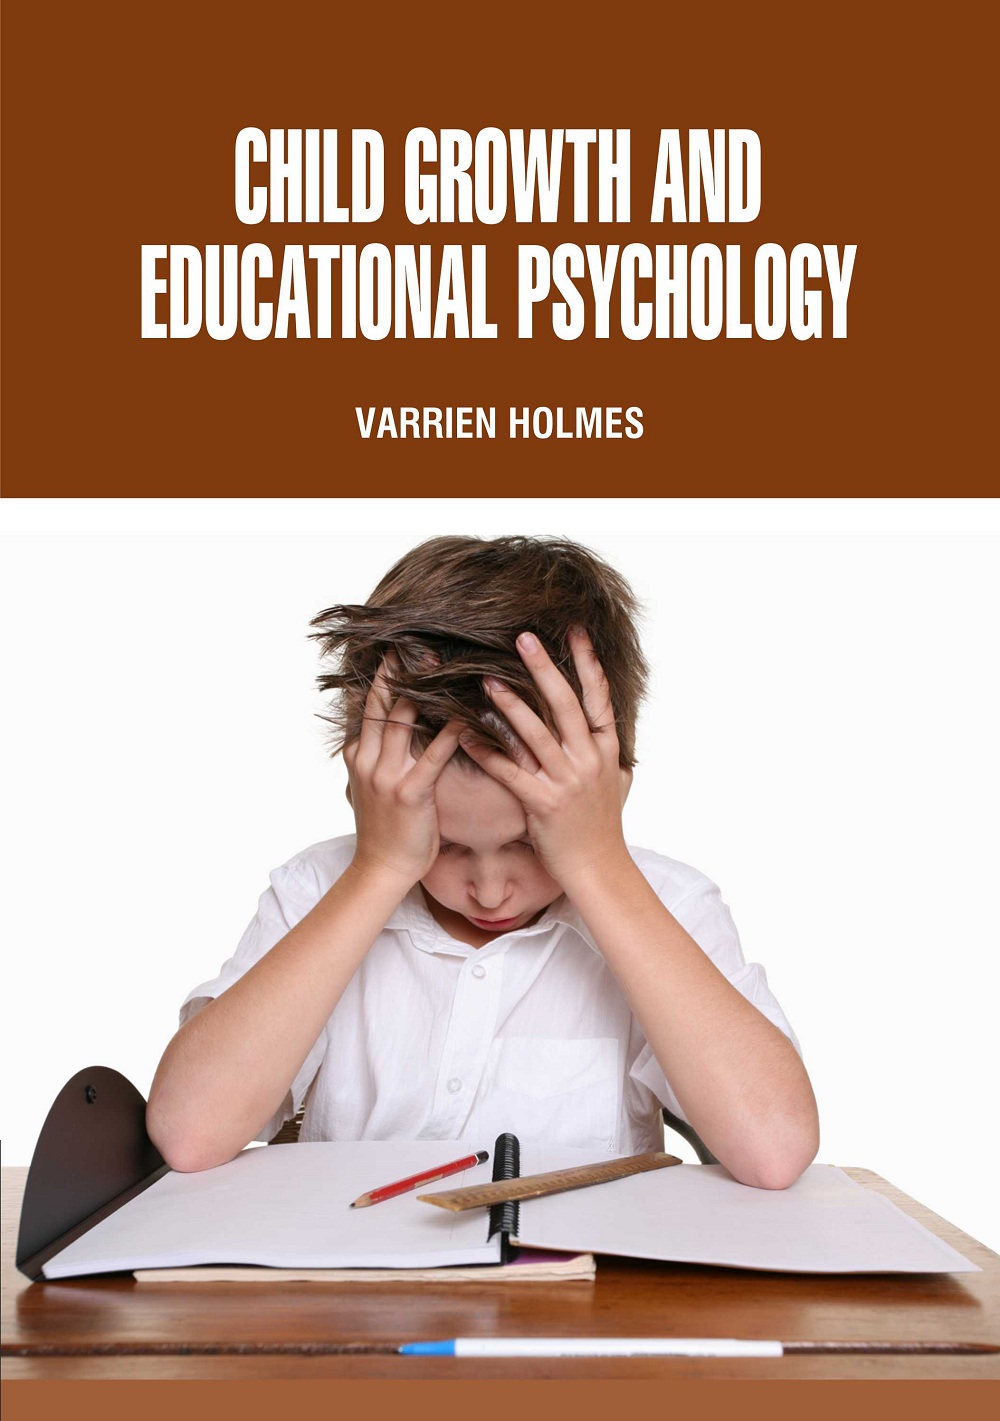 Child Growth and Educational Psychology